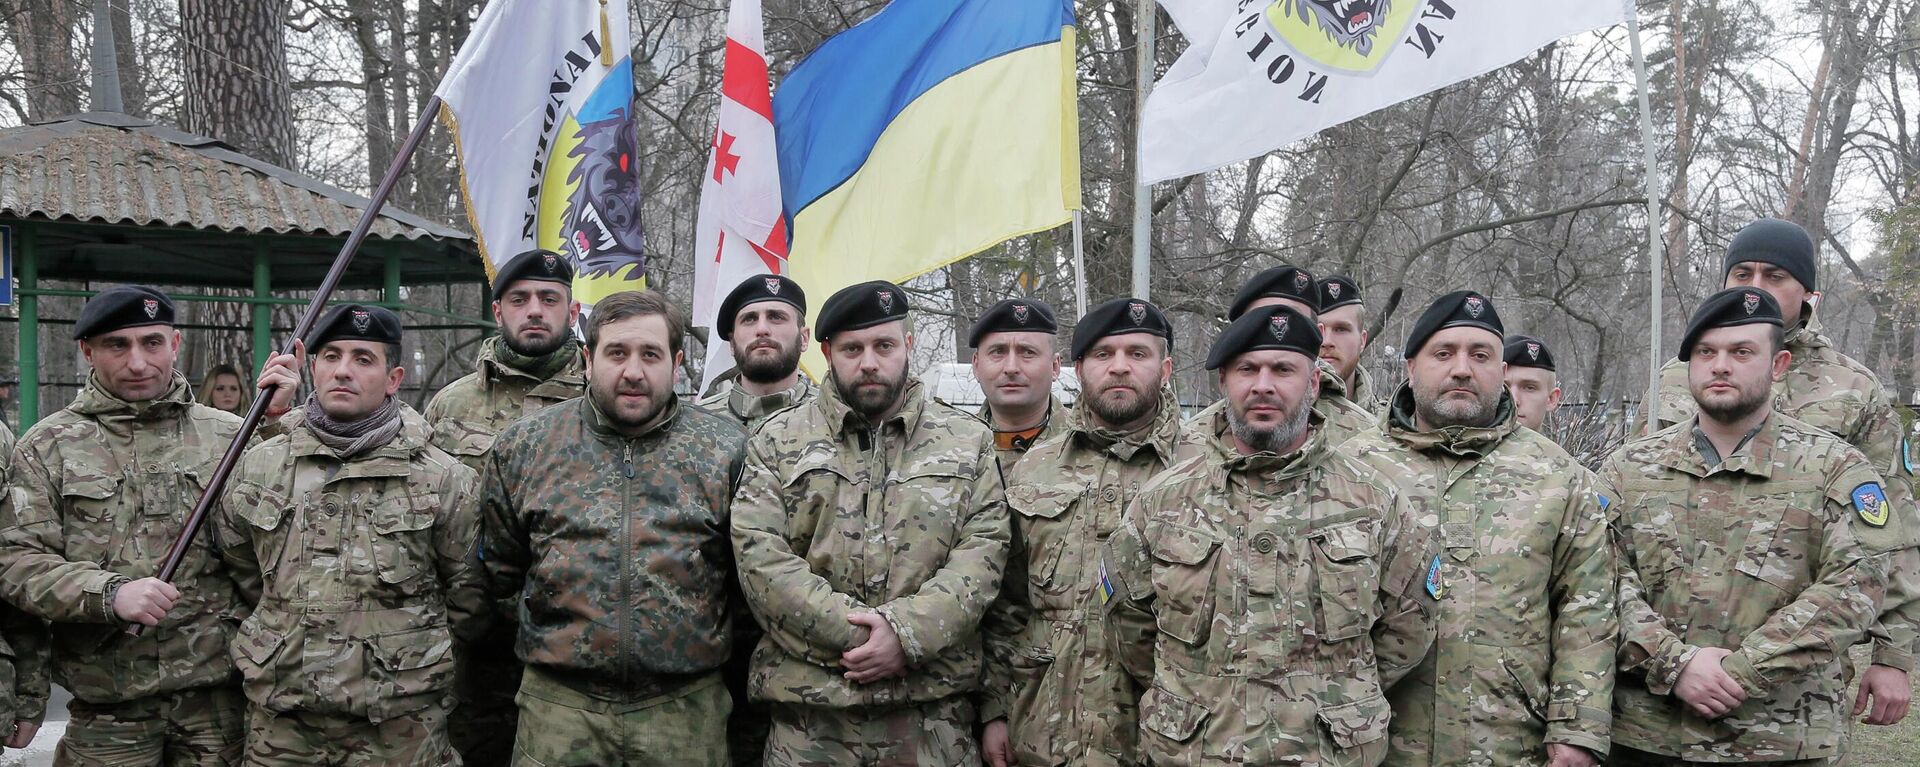 Officers of the Georgian National Legion volunteer battalion pose for a photo prior to their departure to the area of the war conflict in Ukraine's east, in Kiev, Ukraine, Tuesday, March 15, 2016. The Georgian National Legion consists mostly of Georgians, but there are also the US, French and Belgian citizens. (AP Photo/Efrem Lukatsky) - Sputnik International, 1920, 06.04.2022